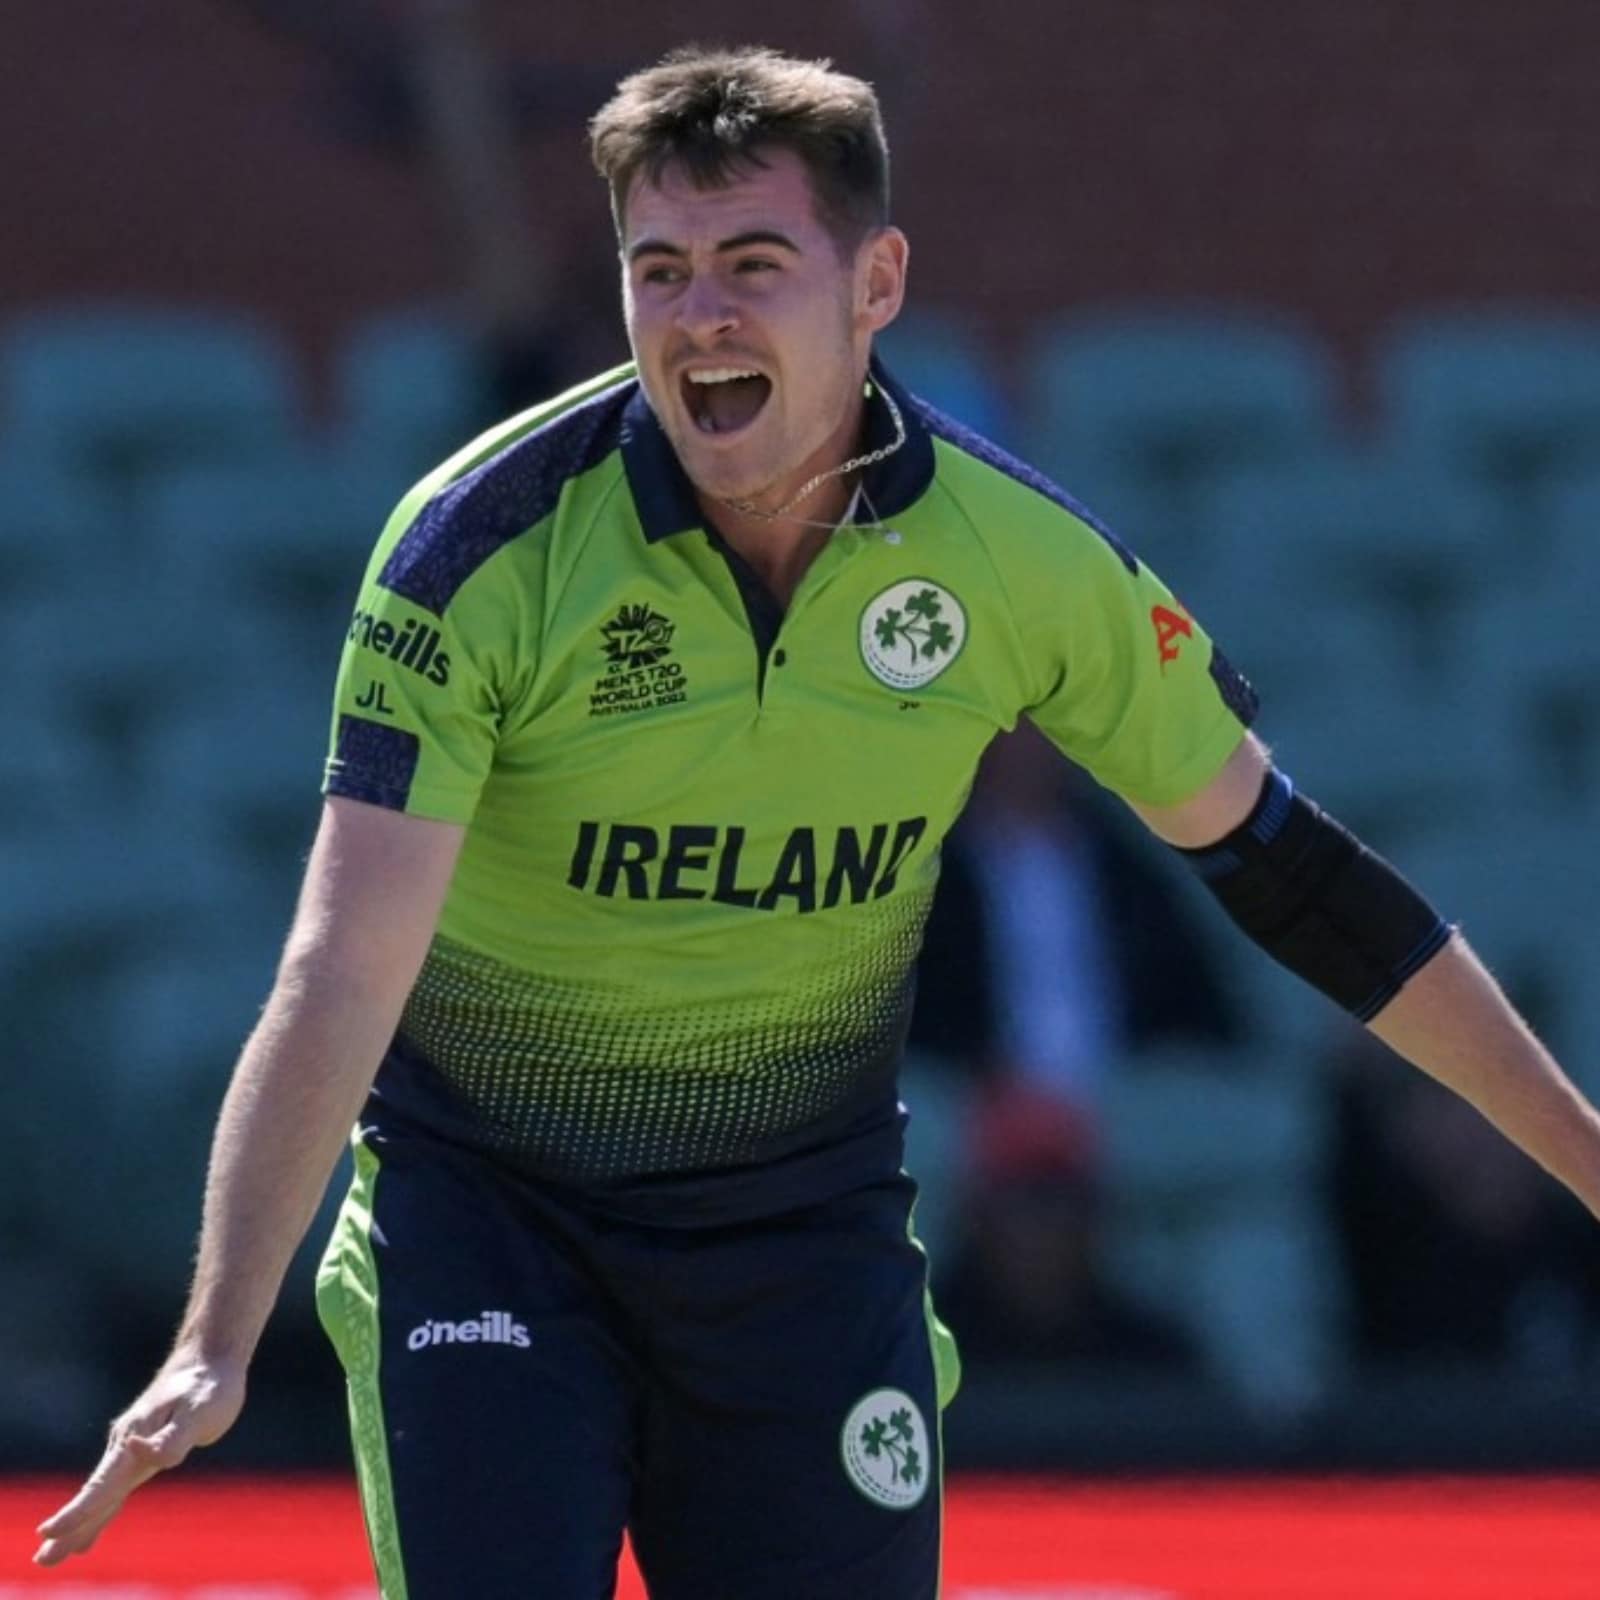 Joshua Little will lead the fast bowling department in this Series for Ireland. Pic Credits-X